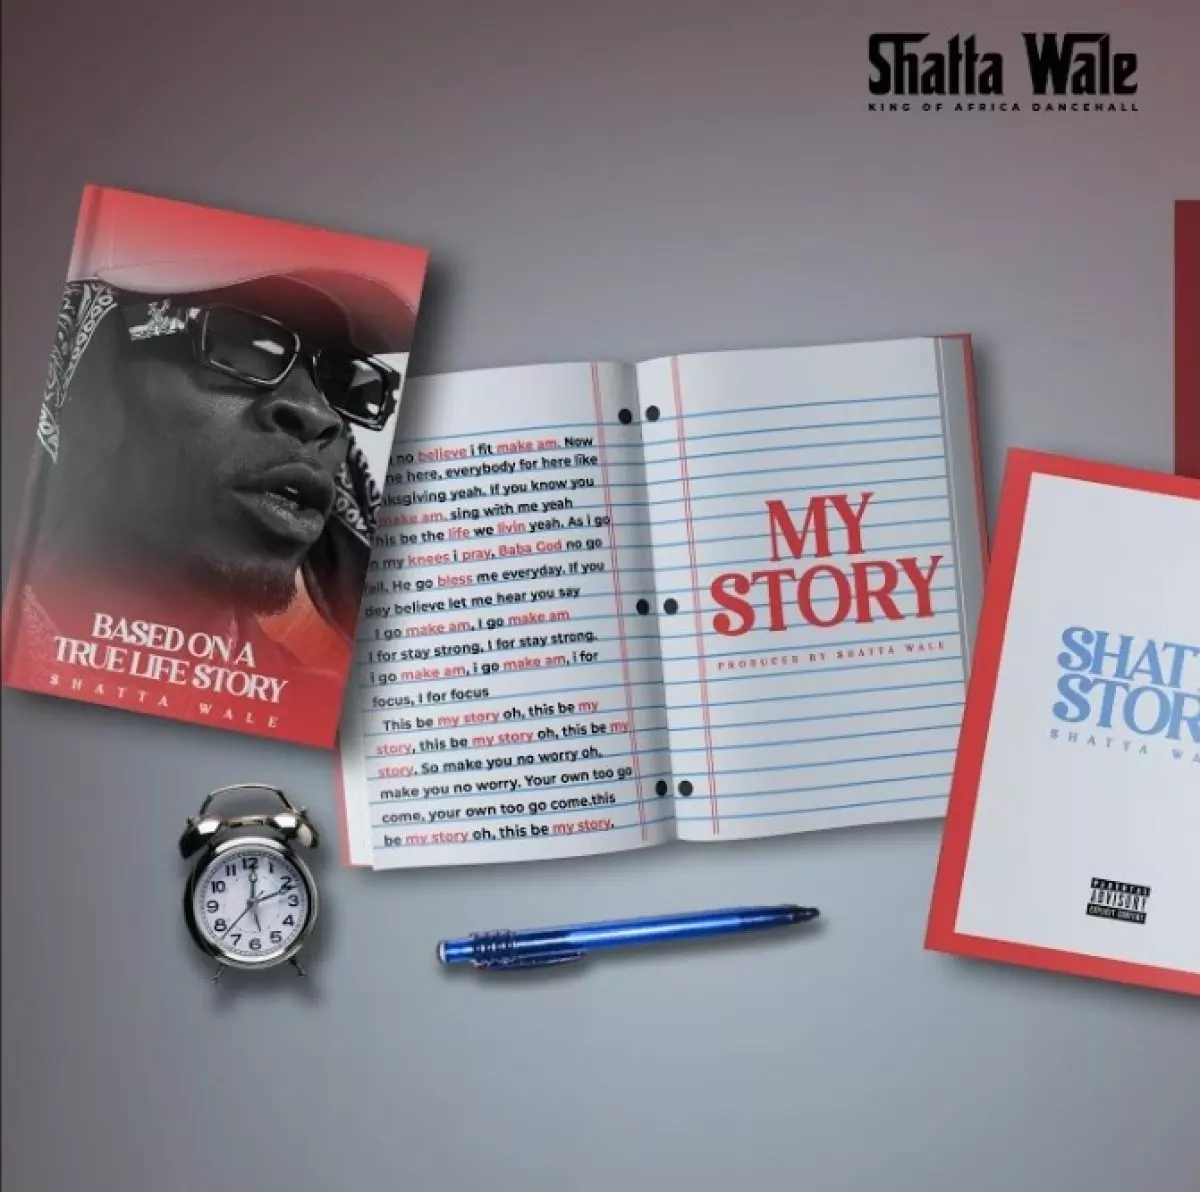 Download MP3: Shatta Wale – My Story